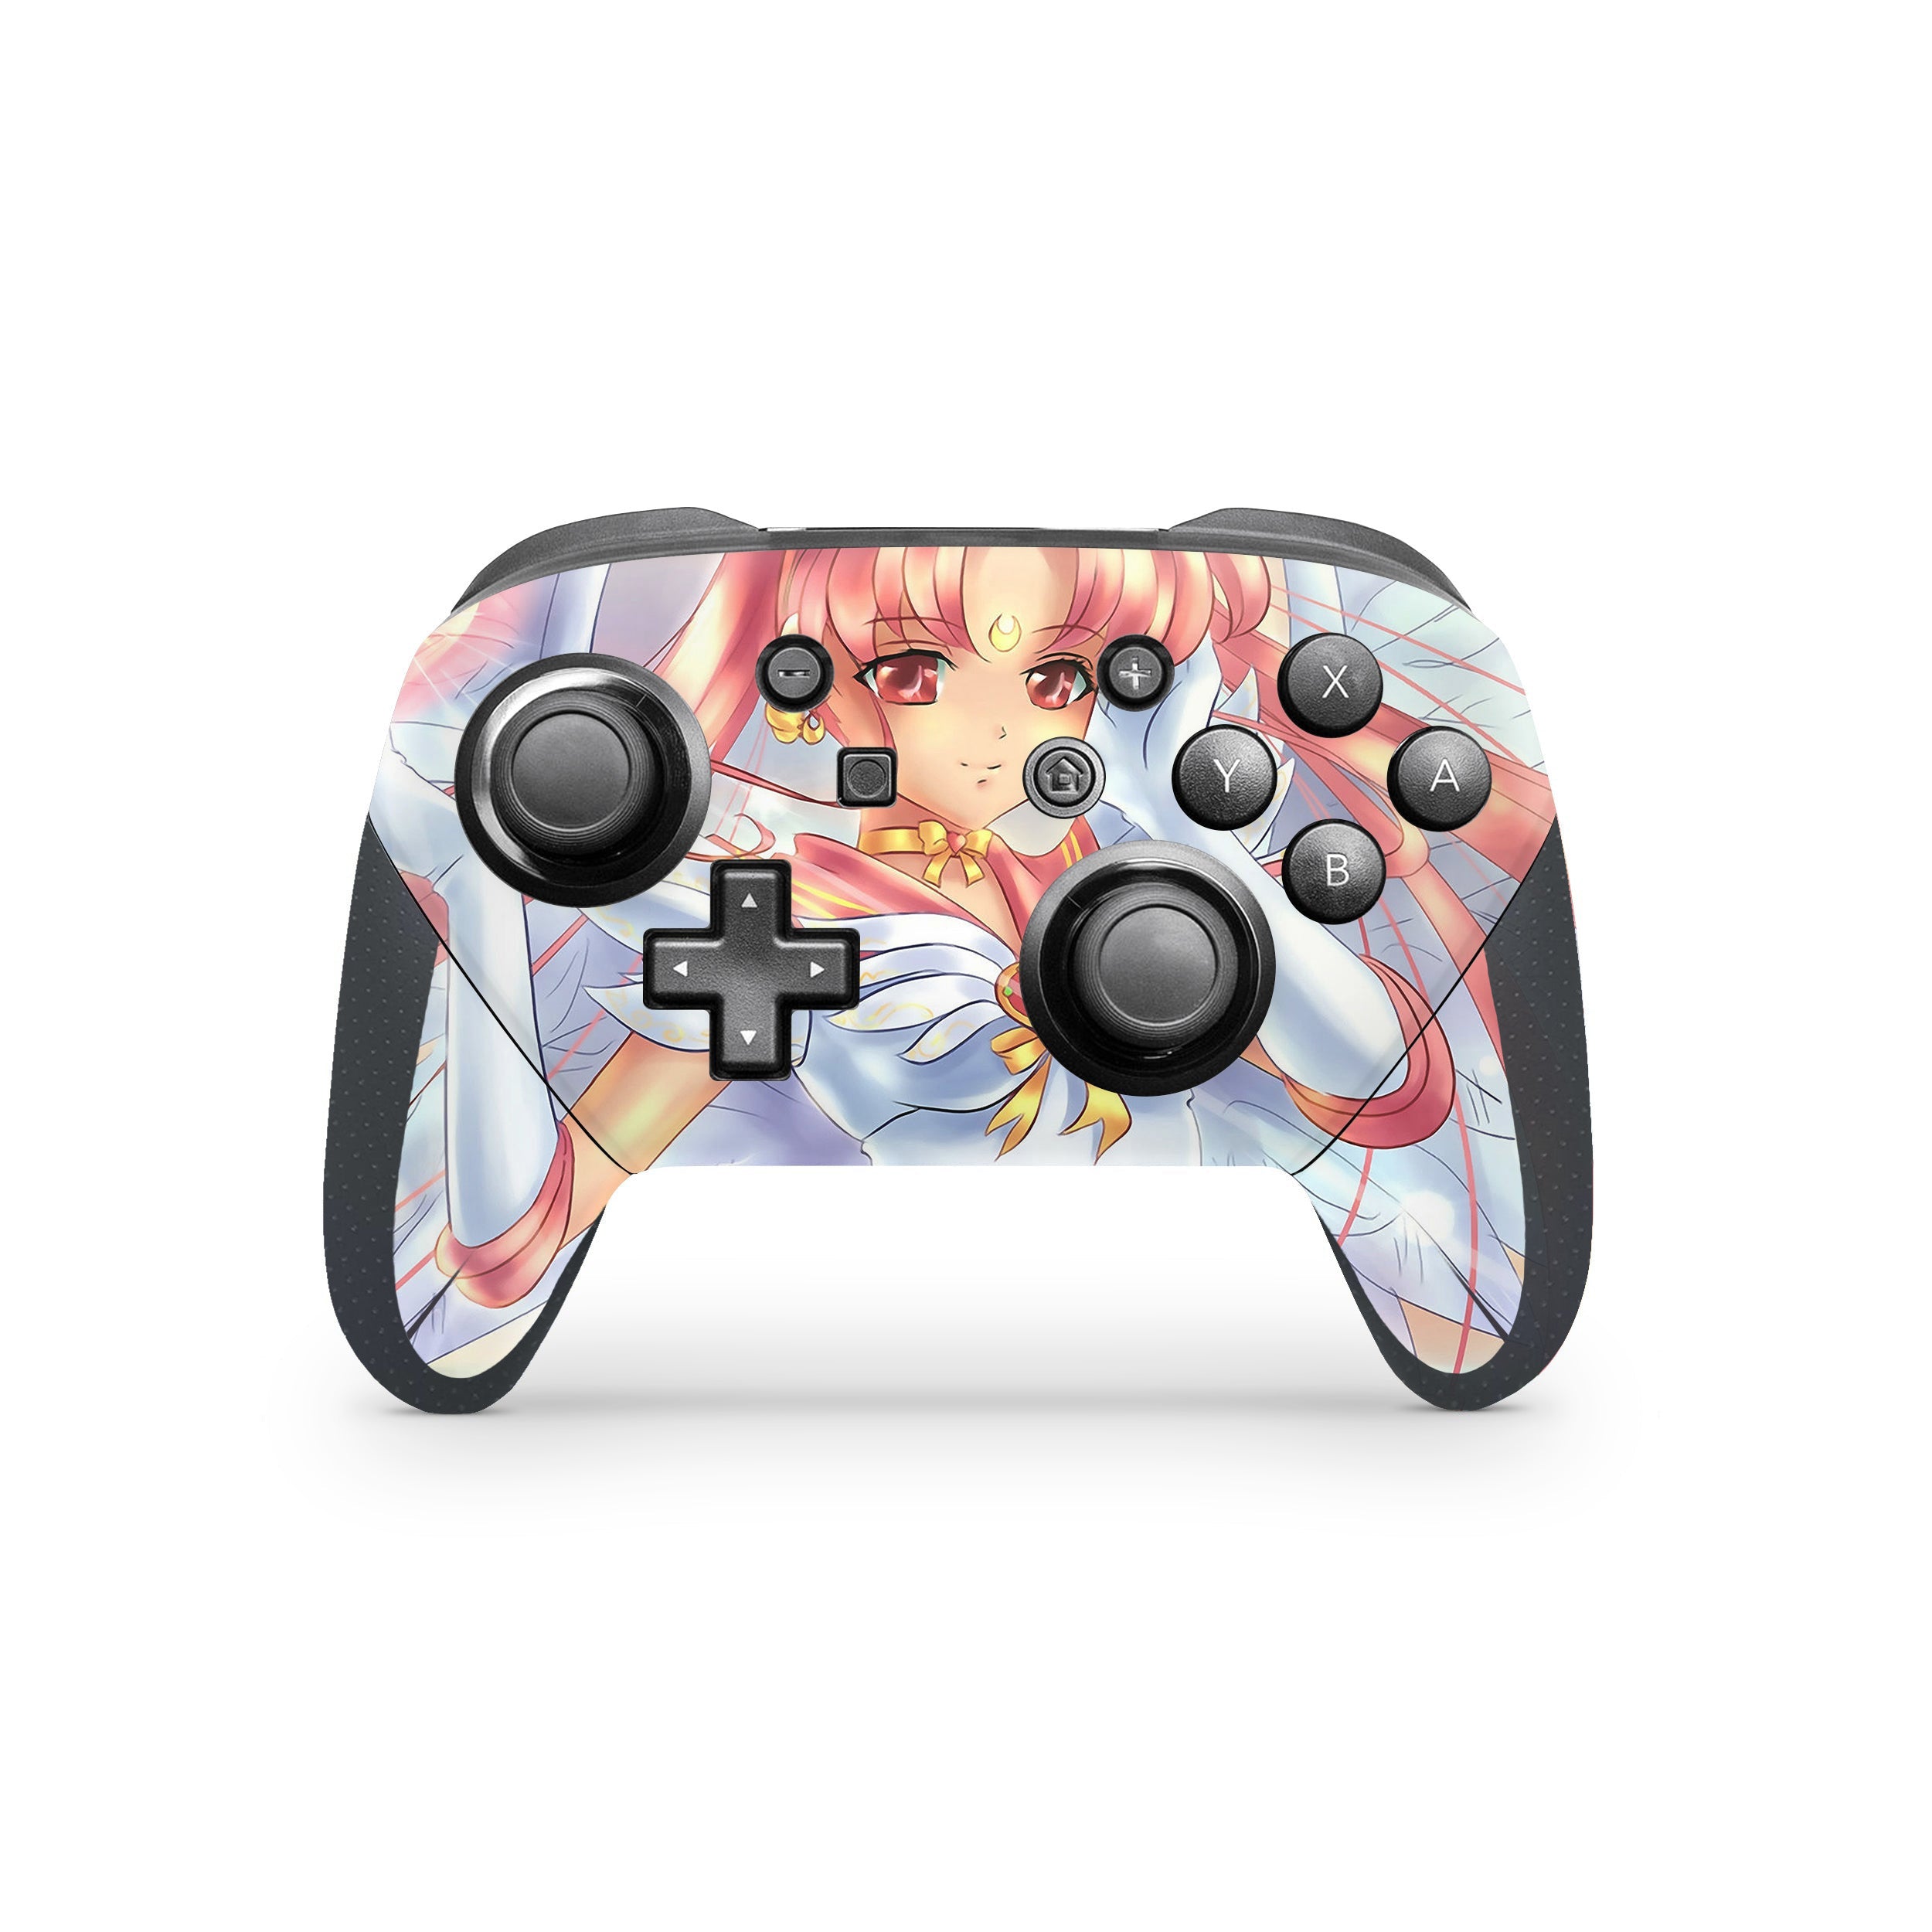 A video game skin featuring a Sailor Moon design for the Switch Pro Controller.